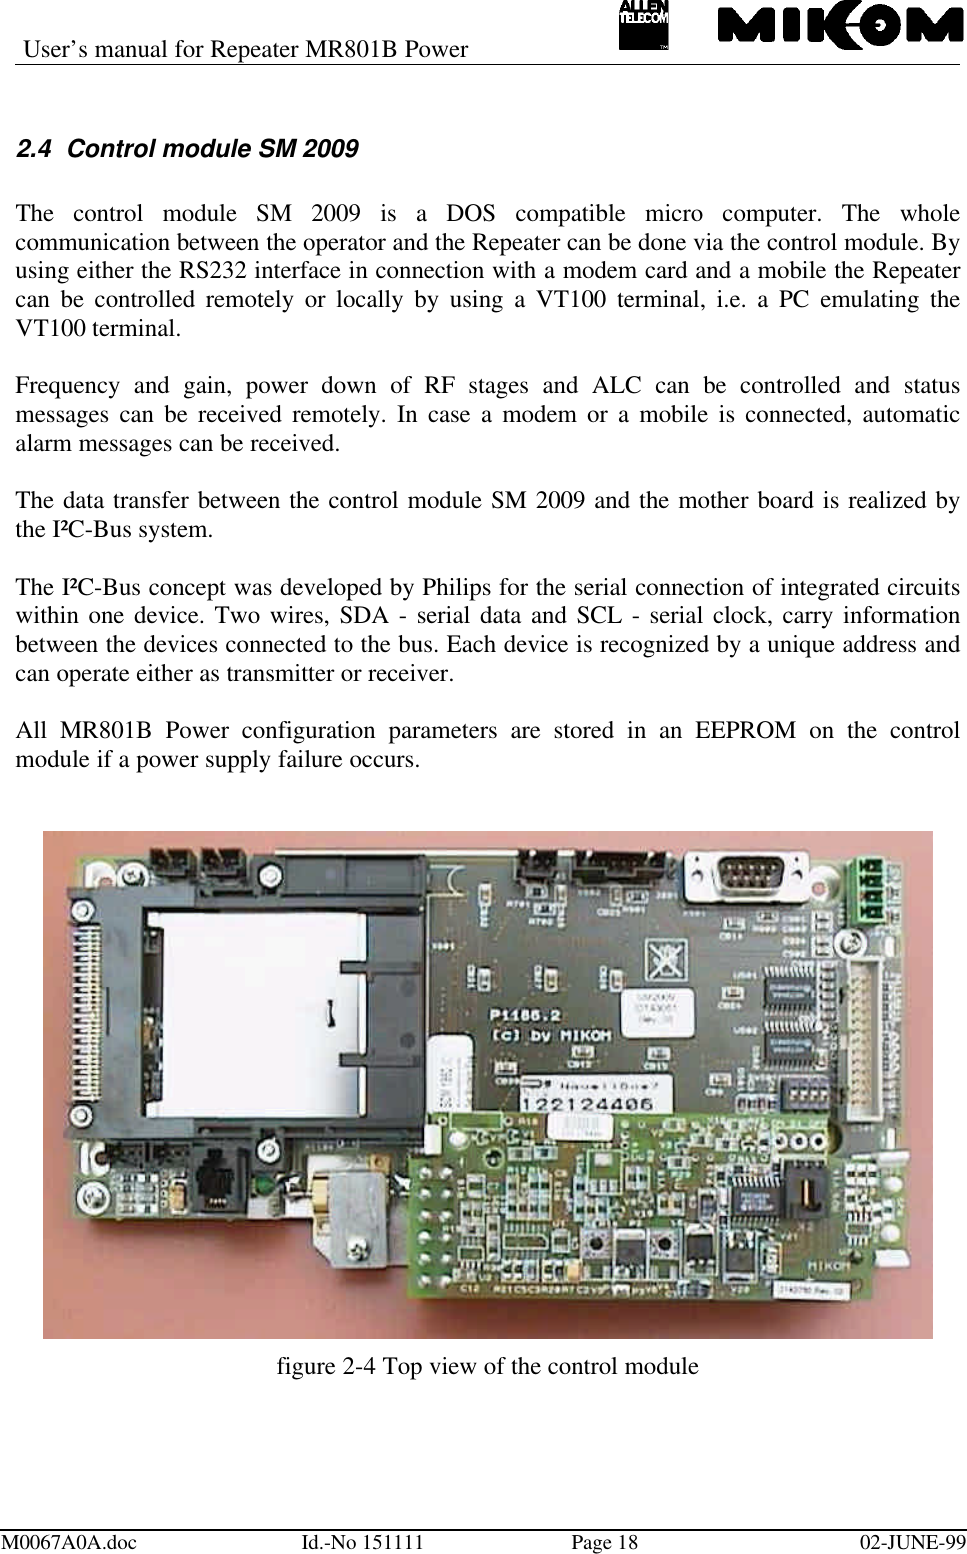 User’s manual for Repeater MR801B PowerM0067A0A.doc Id.-No 151111 Page 18 02-JUNE-992.4 Control module SM 2009The control module SM 2009 is a DOS compatible micro computer. The wholecommunication between the operator and the Repeater can be done via the control module. Byusing either the RS232 interface in connection with a modem card and a mobile the Repeatercan be controlled remotely or locally by using a VT100 terminal, i.e. a PC emulating theVT100 terminal.Frequency and gain, power down of RF stages and ALC can be controlled and statusmessages can be received remotely. In case a modem or a mobile is connected, automaticalarm messages can be received.The data transfer between the control module SM 2009 and the mother board is realized bythe I²C-Bus system.The I²C-Bus concept was developed by Philips for the serial connection of integrated circuitswithin one device. Two wires, SDA - serial data and SCL - serial clock, carry informationbetween the devices connected to the bus. Each device is recognized by a unique address andcan operate either as transmitter or receiver.All MR801B Power configuration parameters are stored in an EEPROM on the controlmodule if a power supply failure occurs.figure 2-4 Top view of the control module